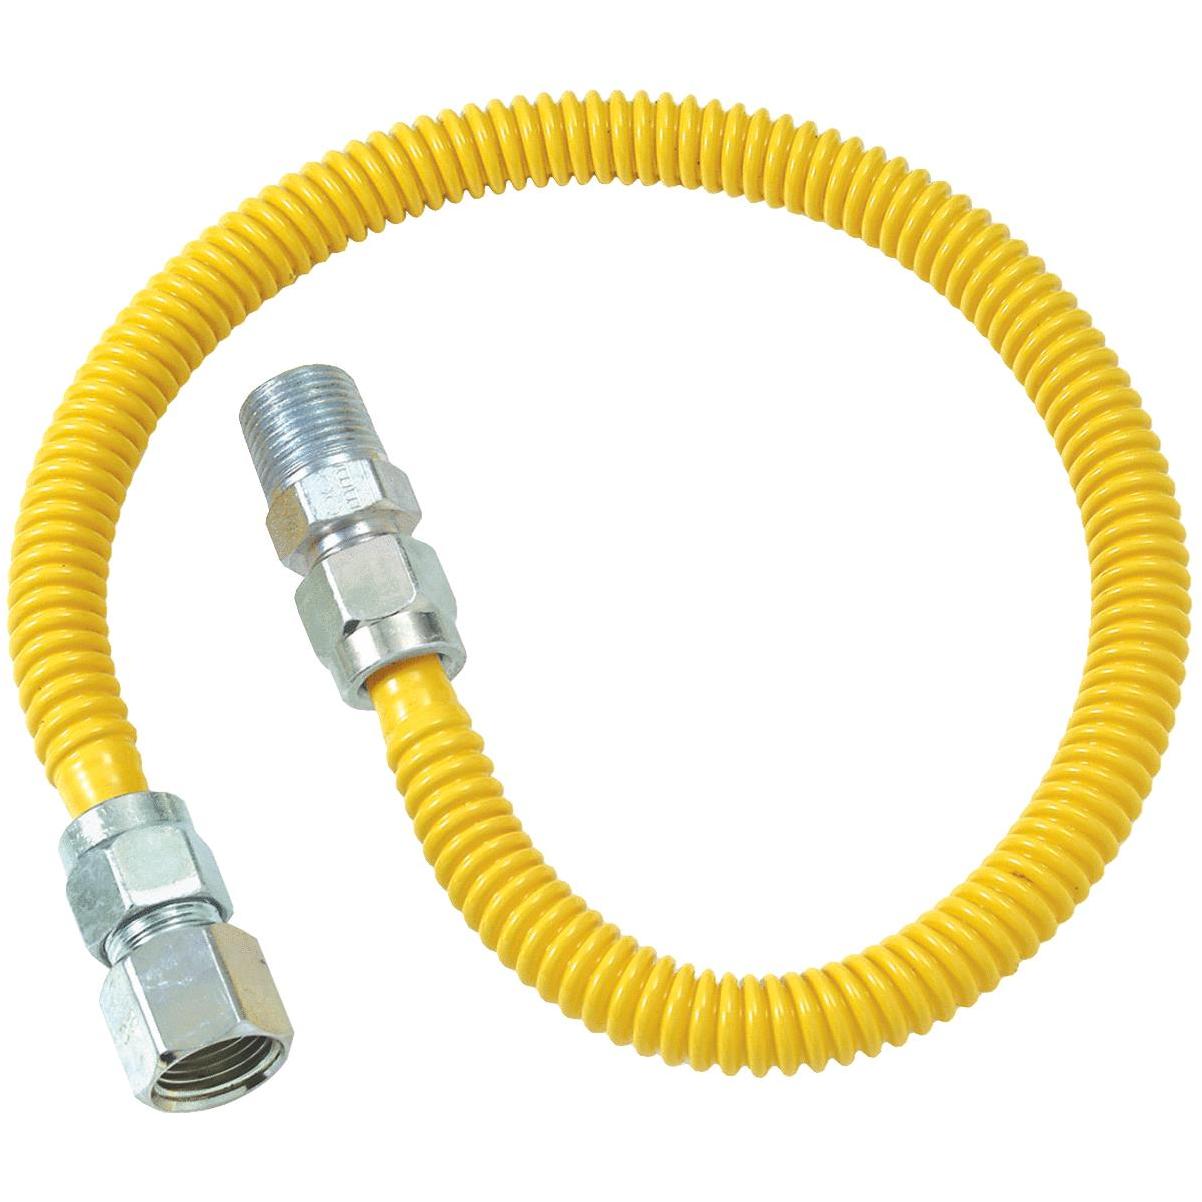 12 in. Flexible 1/2 in. O.D. x 3/8 in. Fittings Gas Connector Yellow Coated Stainless Steel for Dryer and Water Heater